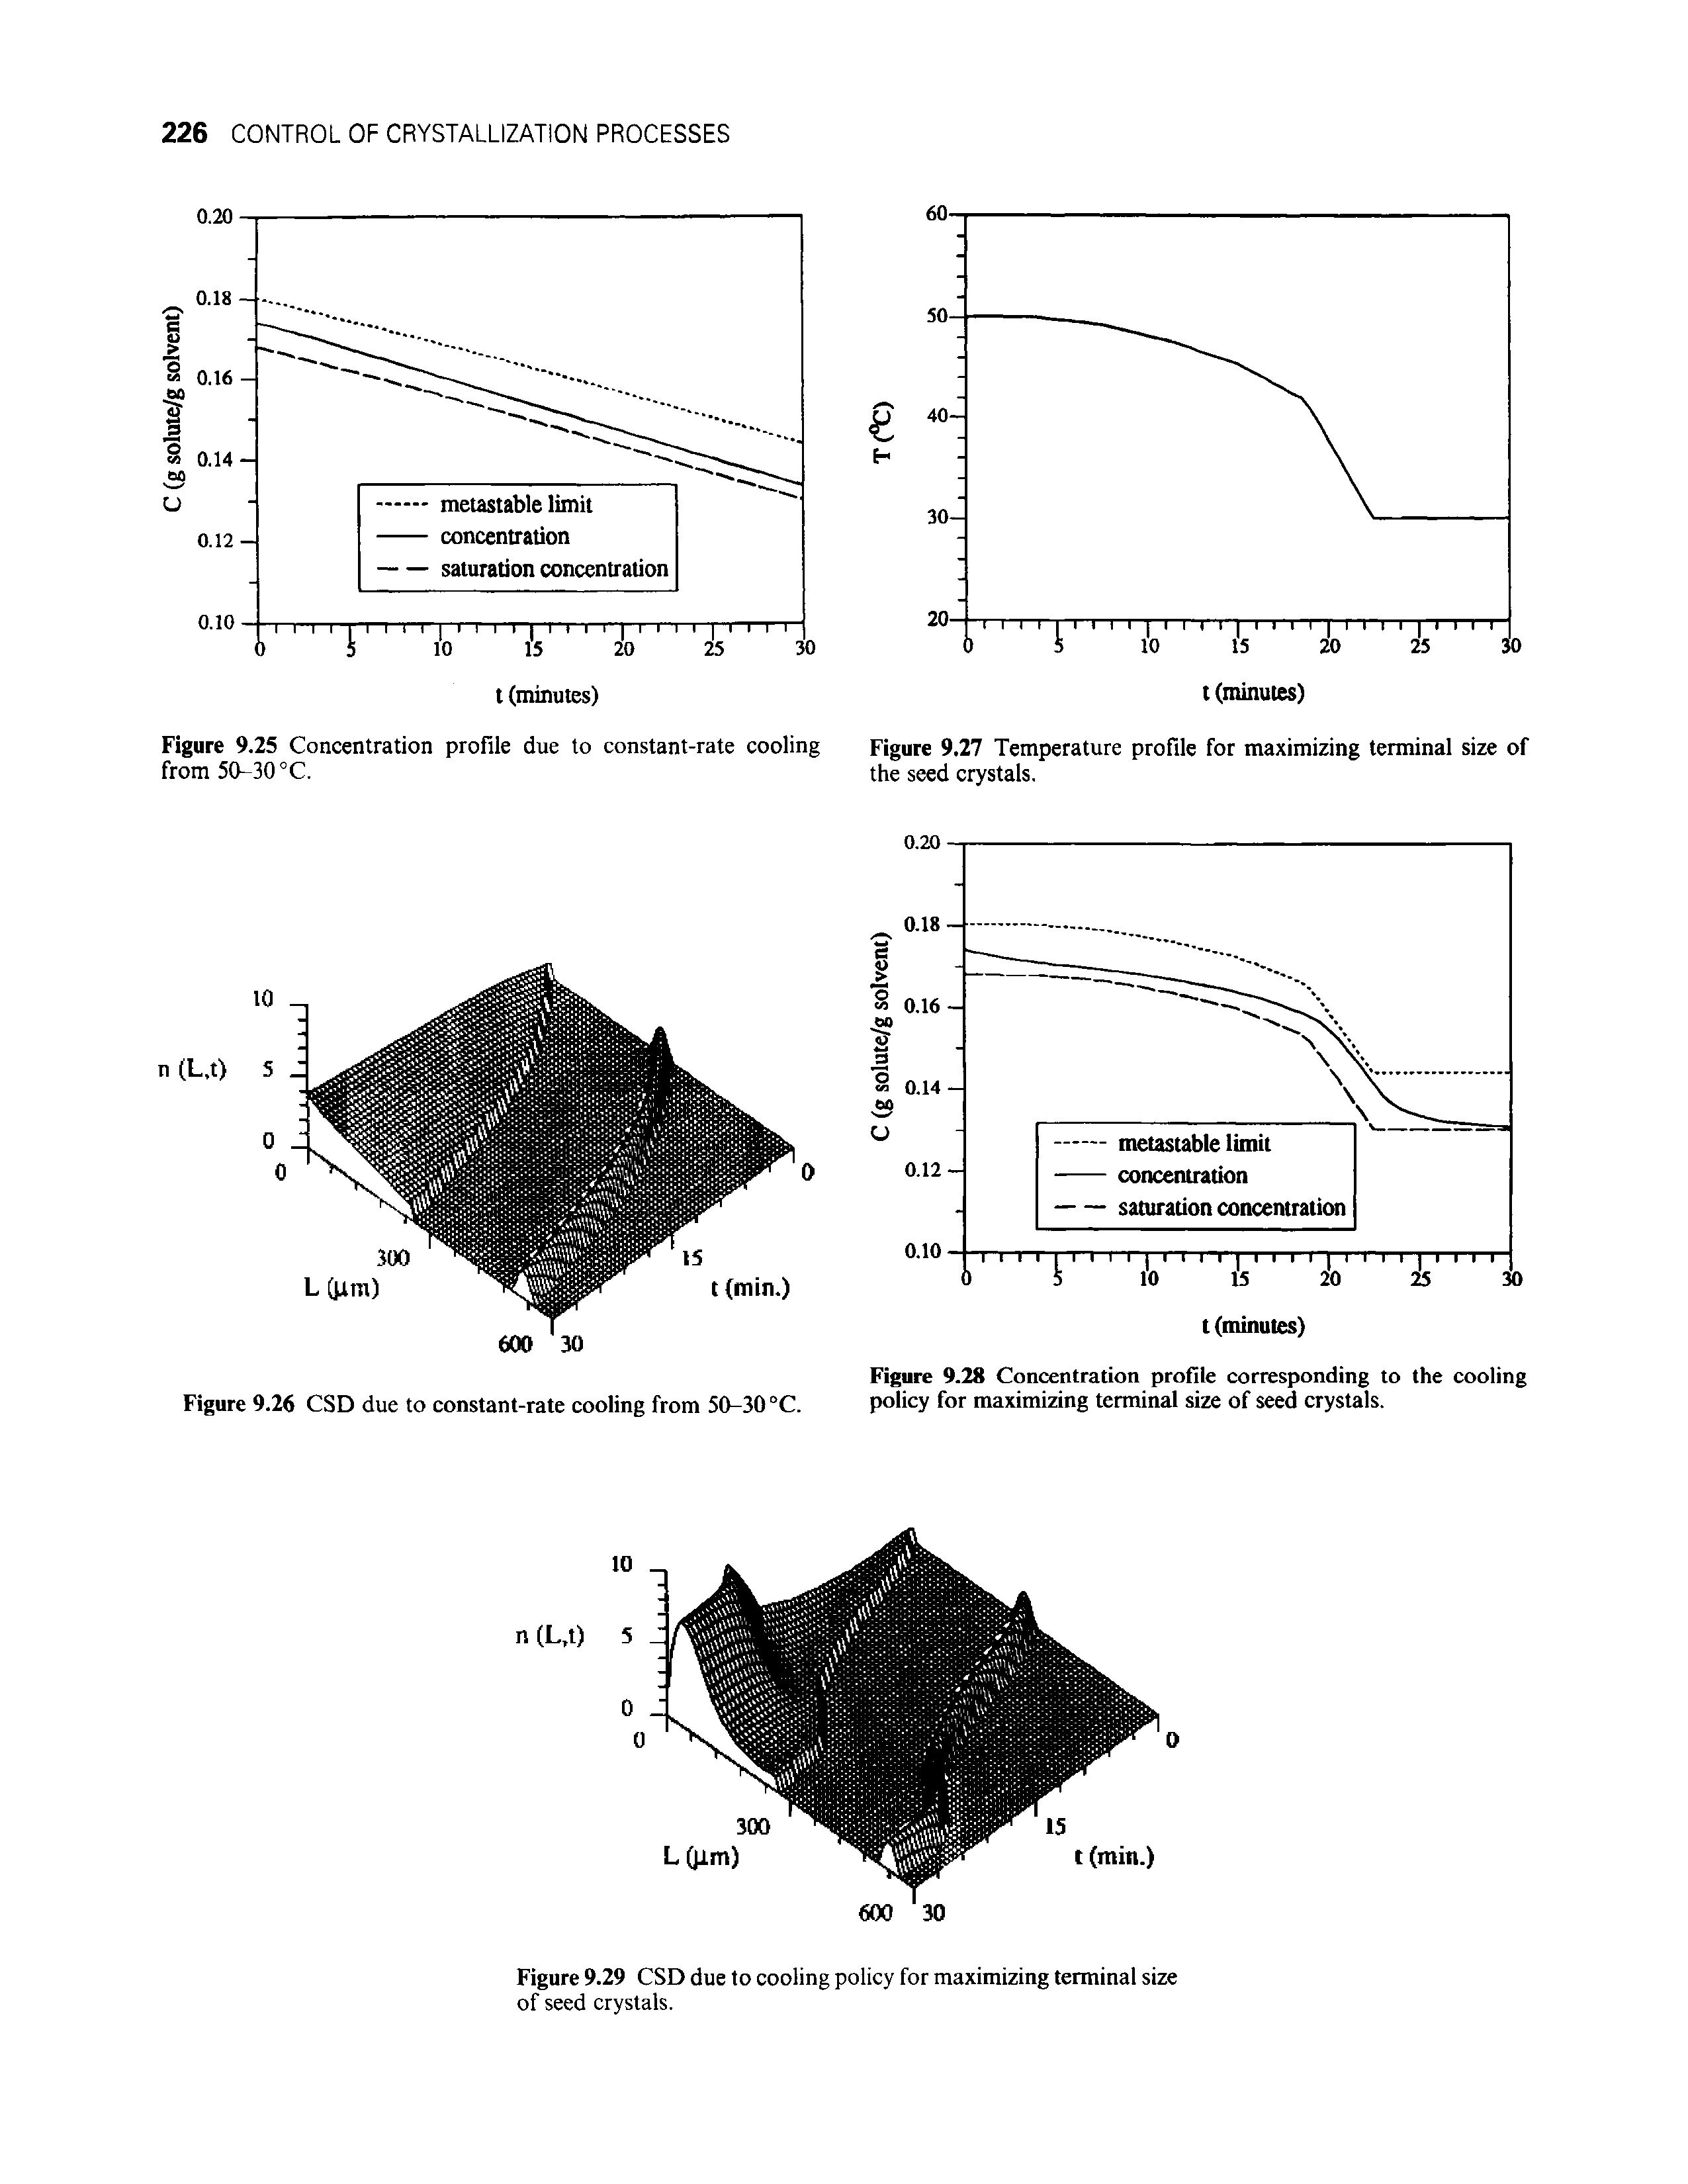 Figure 9.25 Concentration profile due to constant-rate cooling from 50-30 °C.